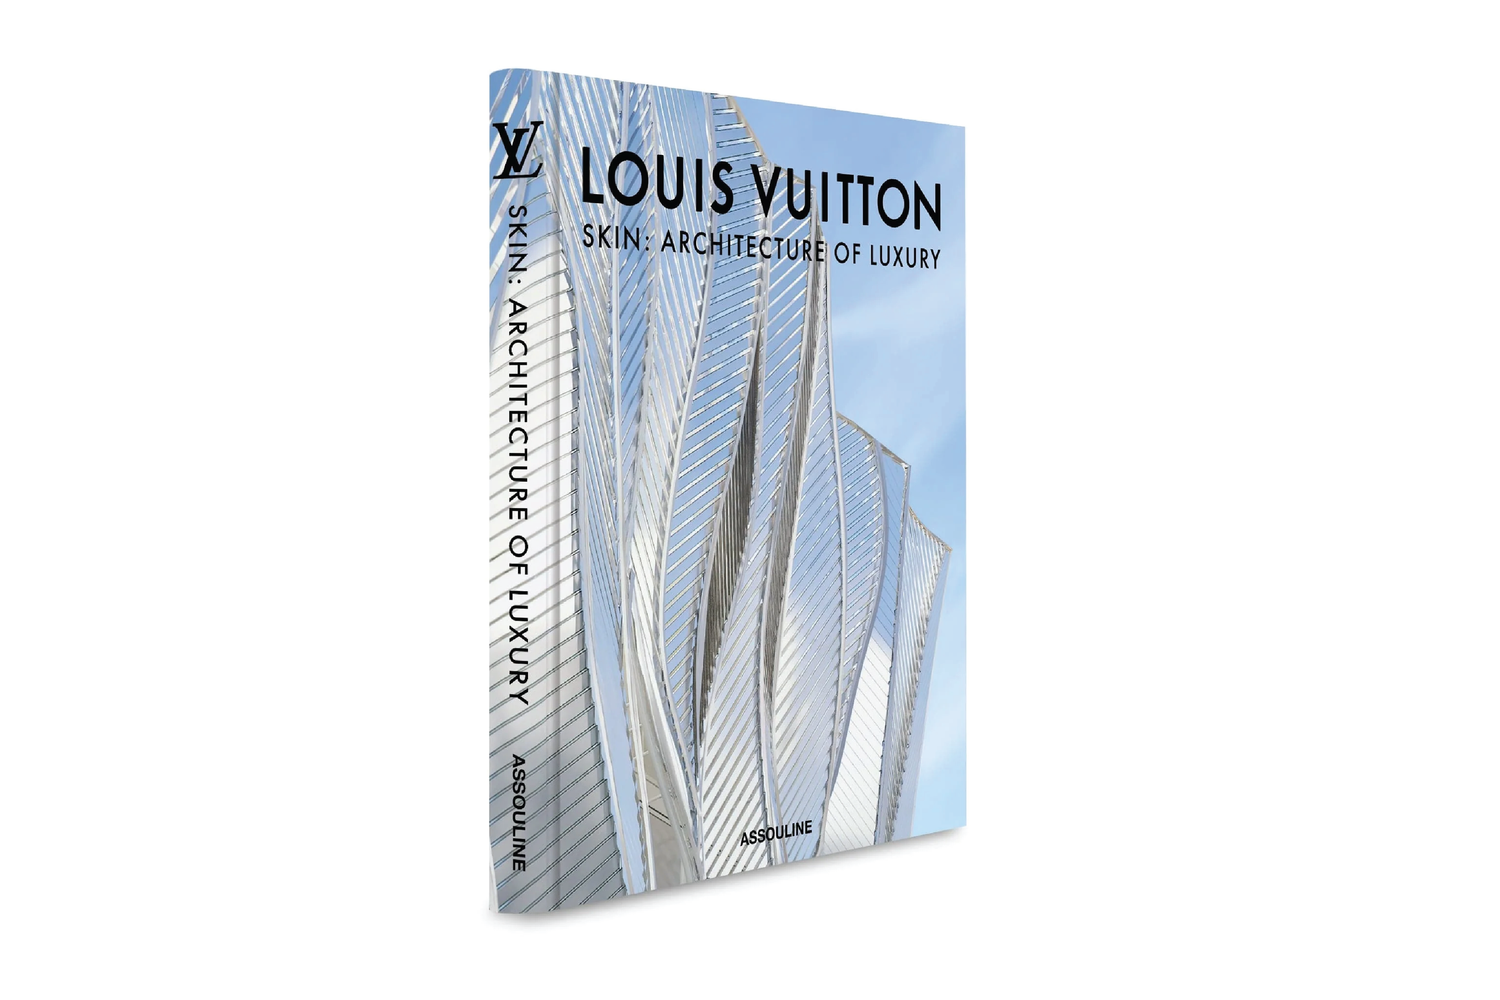 Assouline Louis Vuitton Skin: The Architecture of Luxury (New York